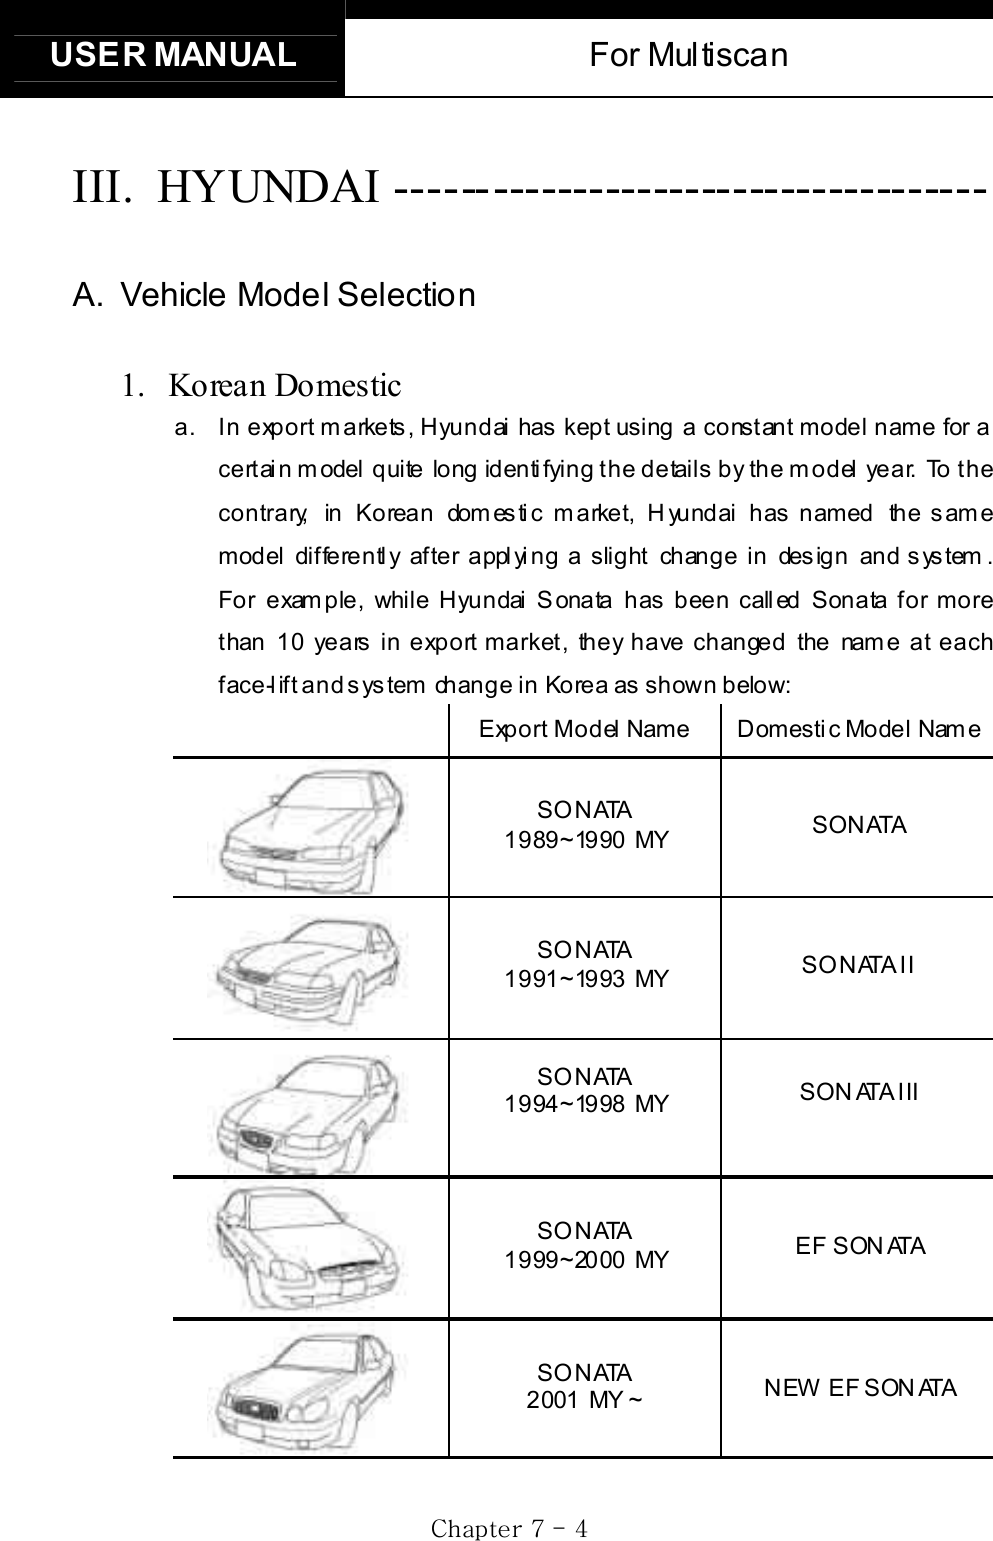 USER MANUAL  For Multiscan GjG^GTG [GIII. HYUNDAI ------------------------------------- A.  Vehicle Model Selection1. Korean Domestic a.  In export markets, Hyundai has kept using a constant model name for a cert ai n m odel  quite  long identi fying the details  by  the m odel  year.  To the contrary, in Korean domestic market, Hyundai has named the same model differently after applying a slight change in design and system . For example, while Hyundai Sonata has been called Sonata for more than 10 years in export market, they have changed the name at each face-l ift and s ys tem  change in  Korea as  shown below:     Export Model Name  Domestic Model Name SONATA 1989~1990 MY  SONATA SONATA 1991~1993 MY  SONATA II SONATA 1994~1998 MY  SONATA III SONATA 1999~2000 MY  EF SON ATA SONATA 2001 MY ~  NEW EF SON ATA 